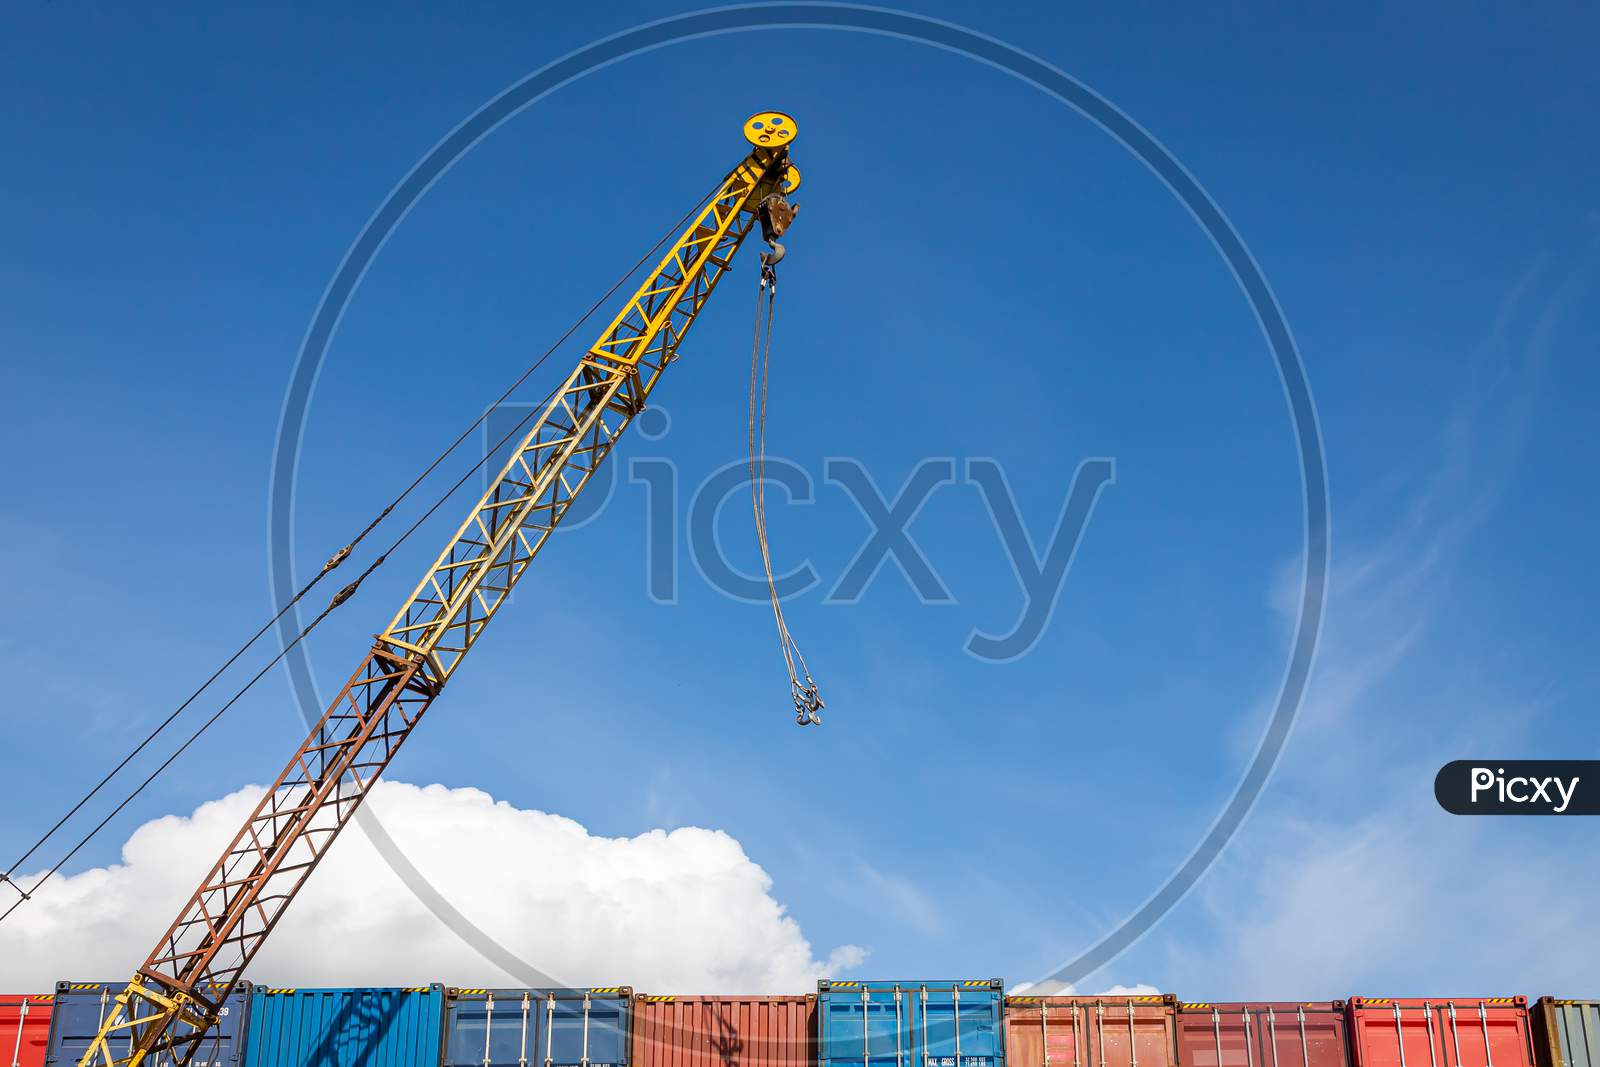 A Cargo Crane Operates In The Territory Of The Container Freight Yard: A Lot Of Metal Containers For Storing Goods Of Different Colors, Stacked In Rows On Top Of Each Other.